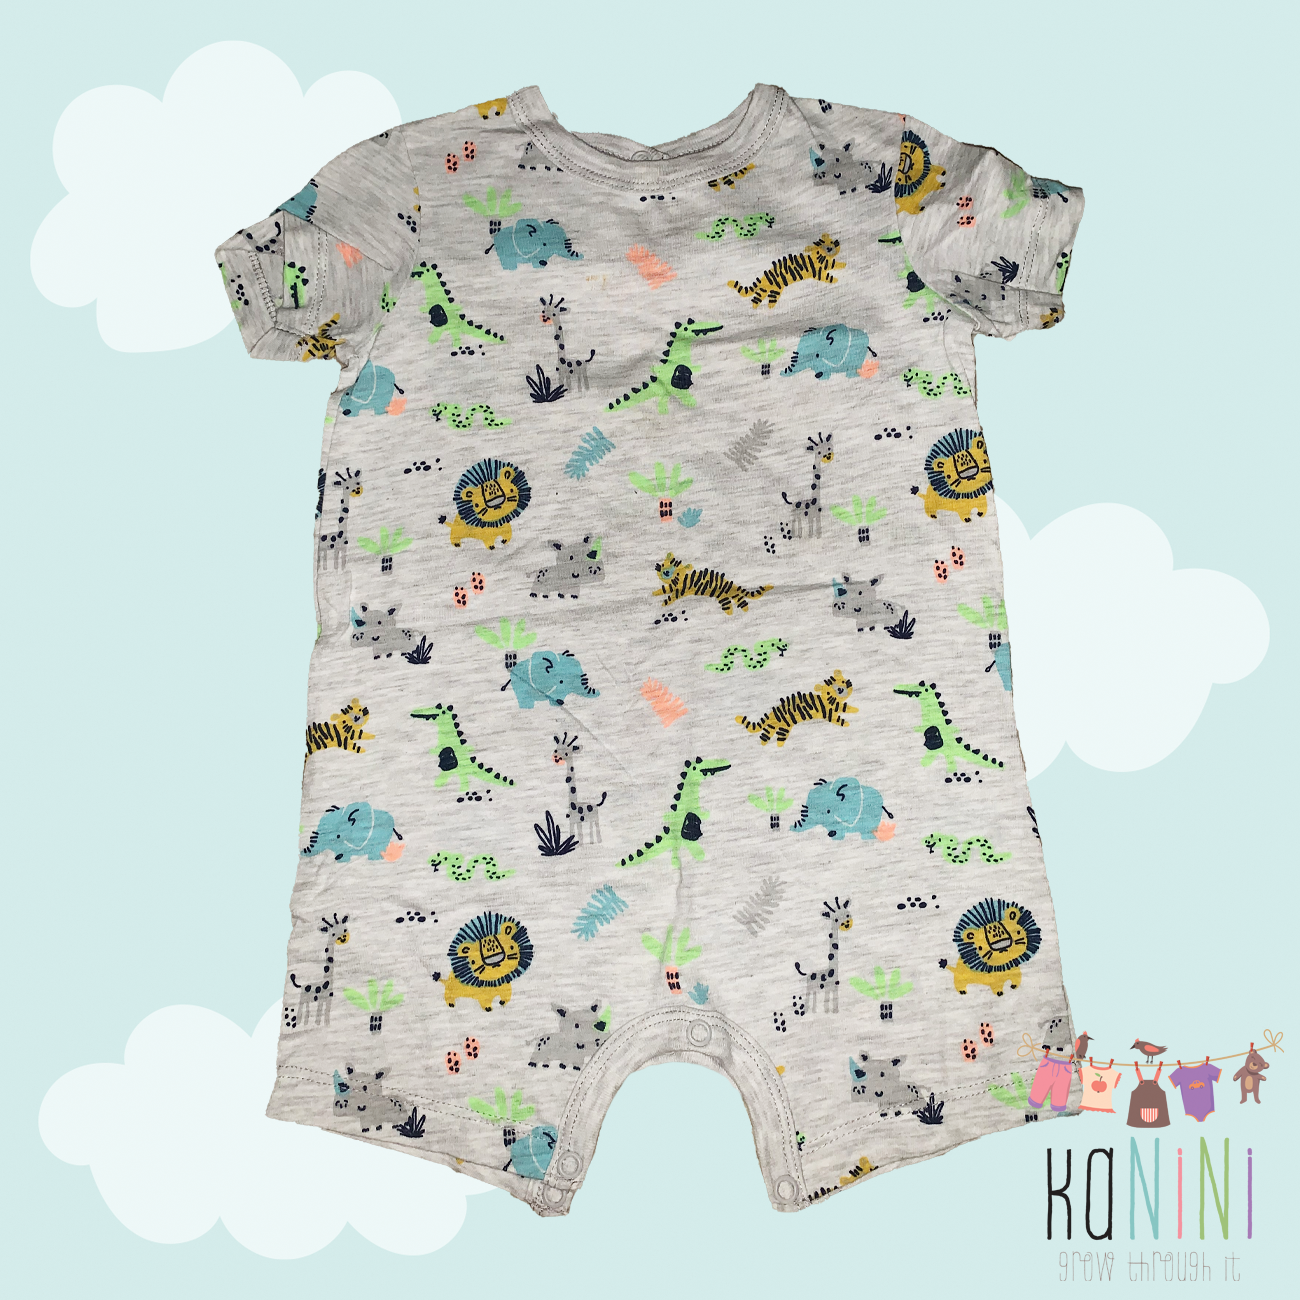 Featured image for “Woolworths 6 - 12 Months Boys Grey Romper”